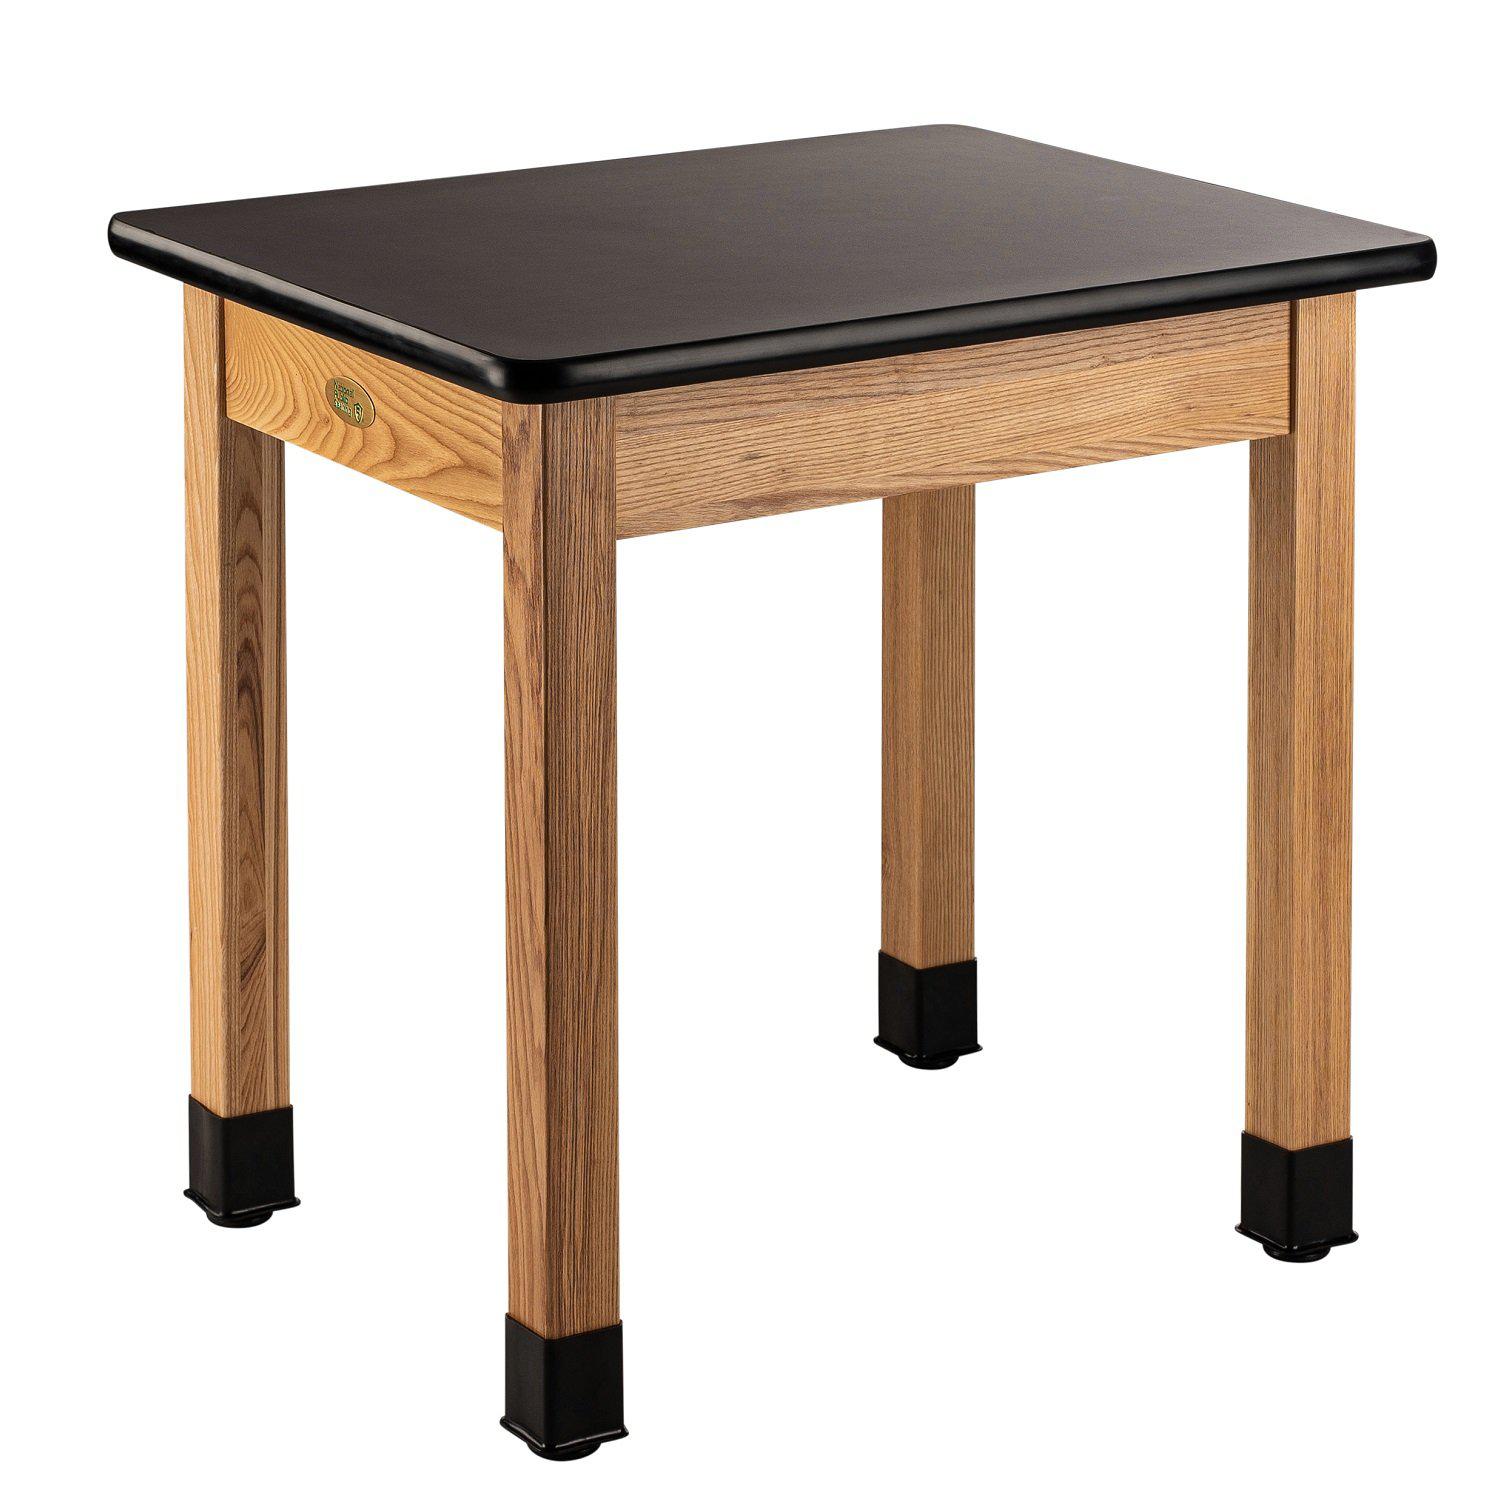 Personal Science Lab Table, Wood Frame, 24"x30"x36" H, Black High Pressure Laminate Top